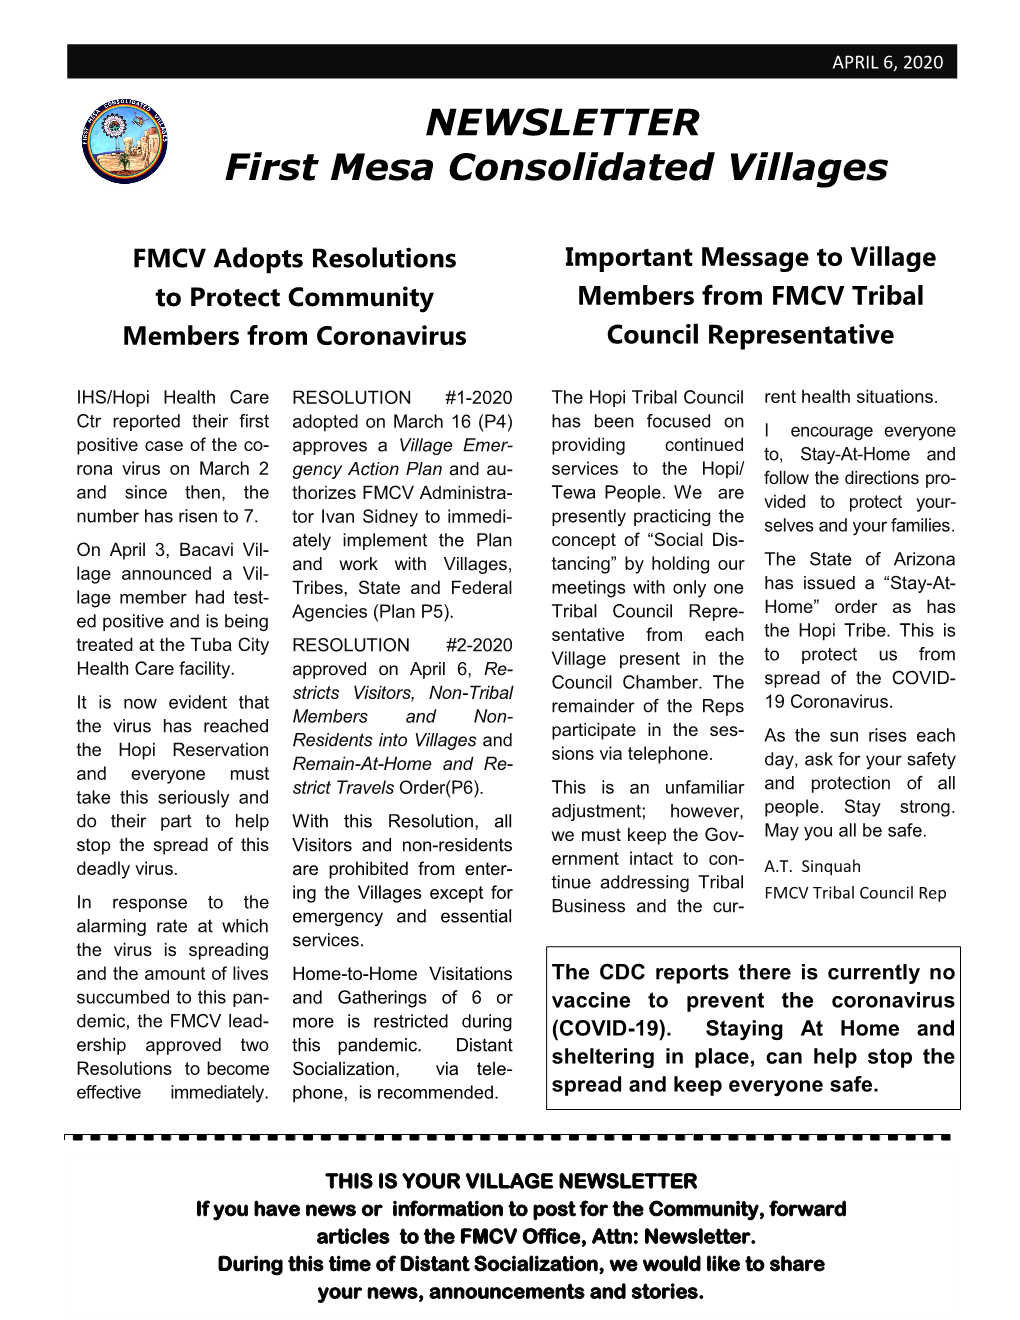 NEWSLETTER First Mesa Consolidated Villages